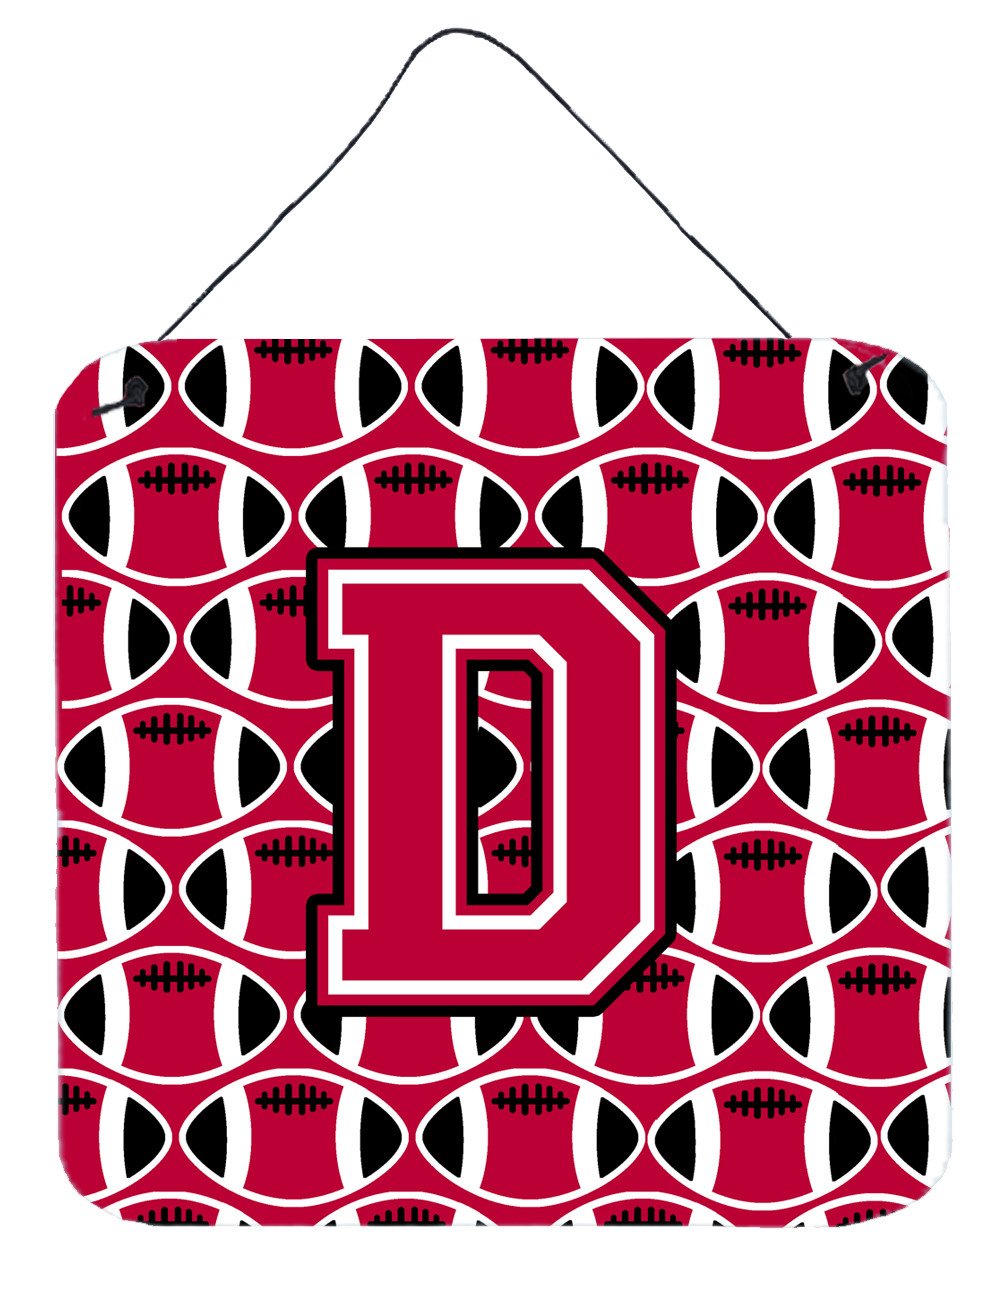 Letter D Football Crimson and White Wall or Door Hanging Prints CJ1079-DDS66 by Caroline's Treasures